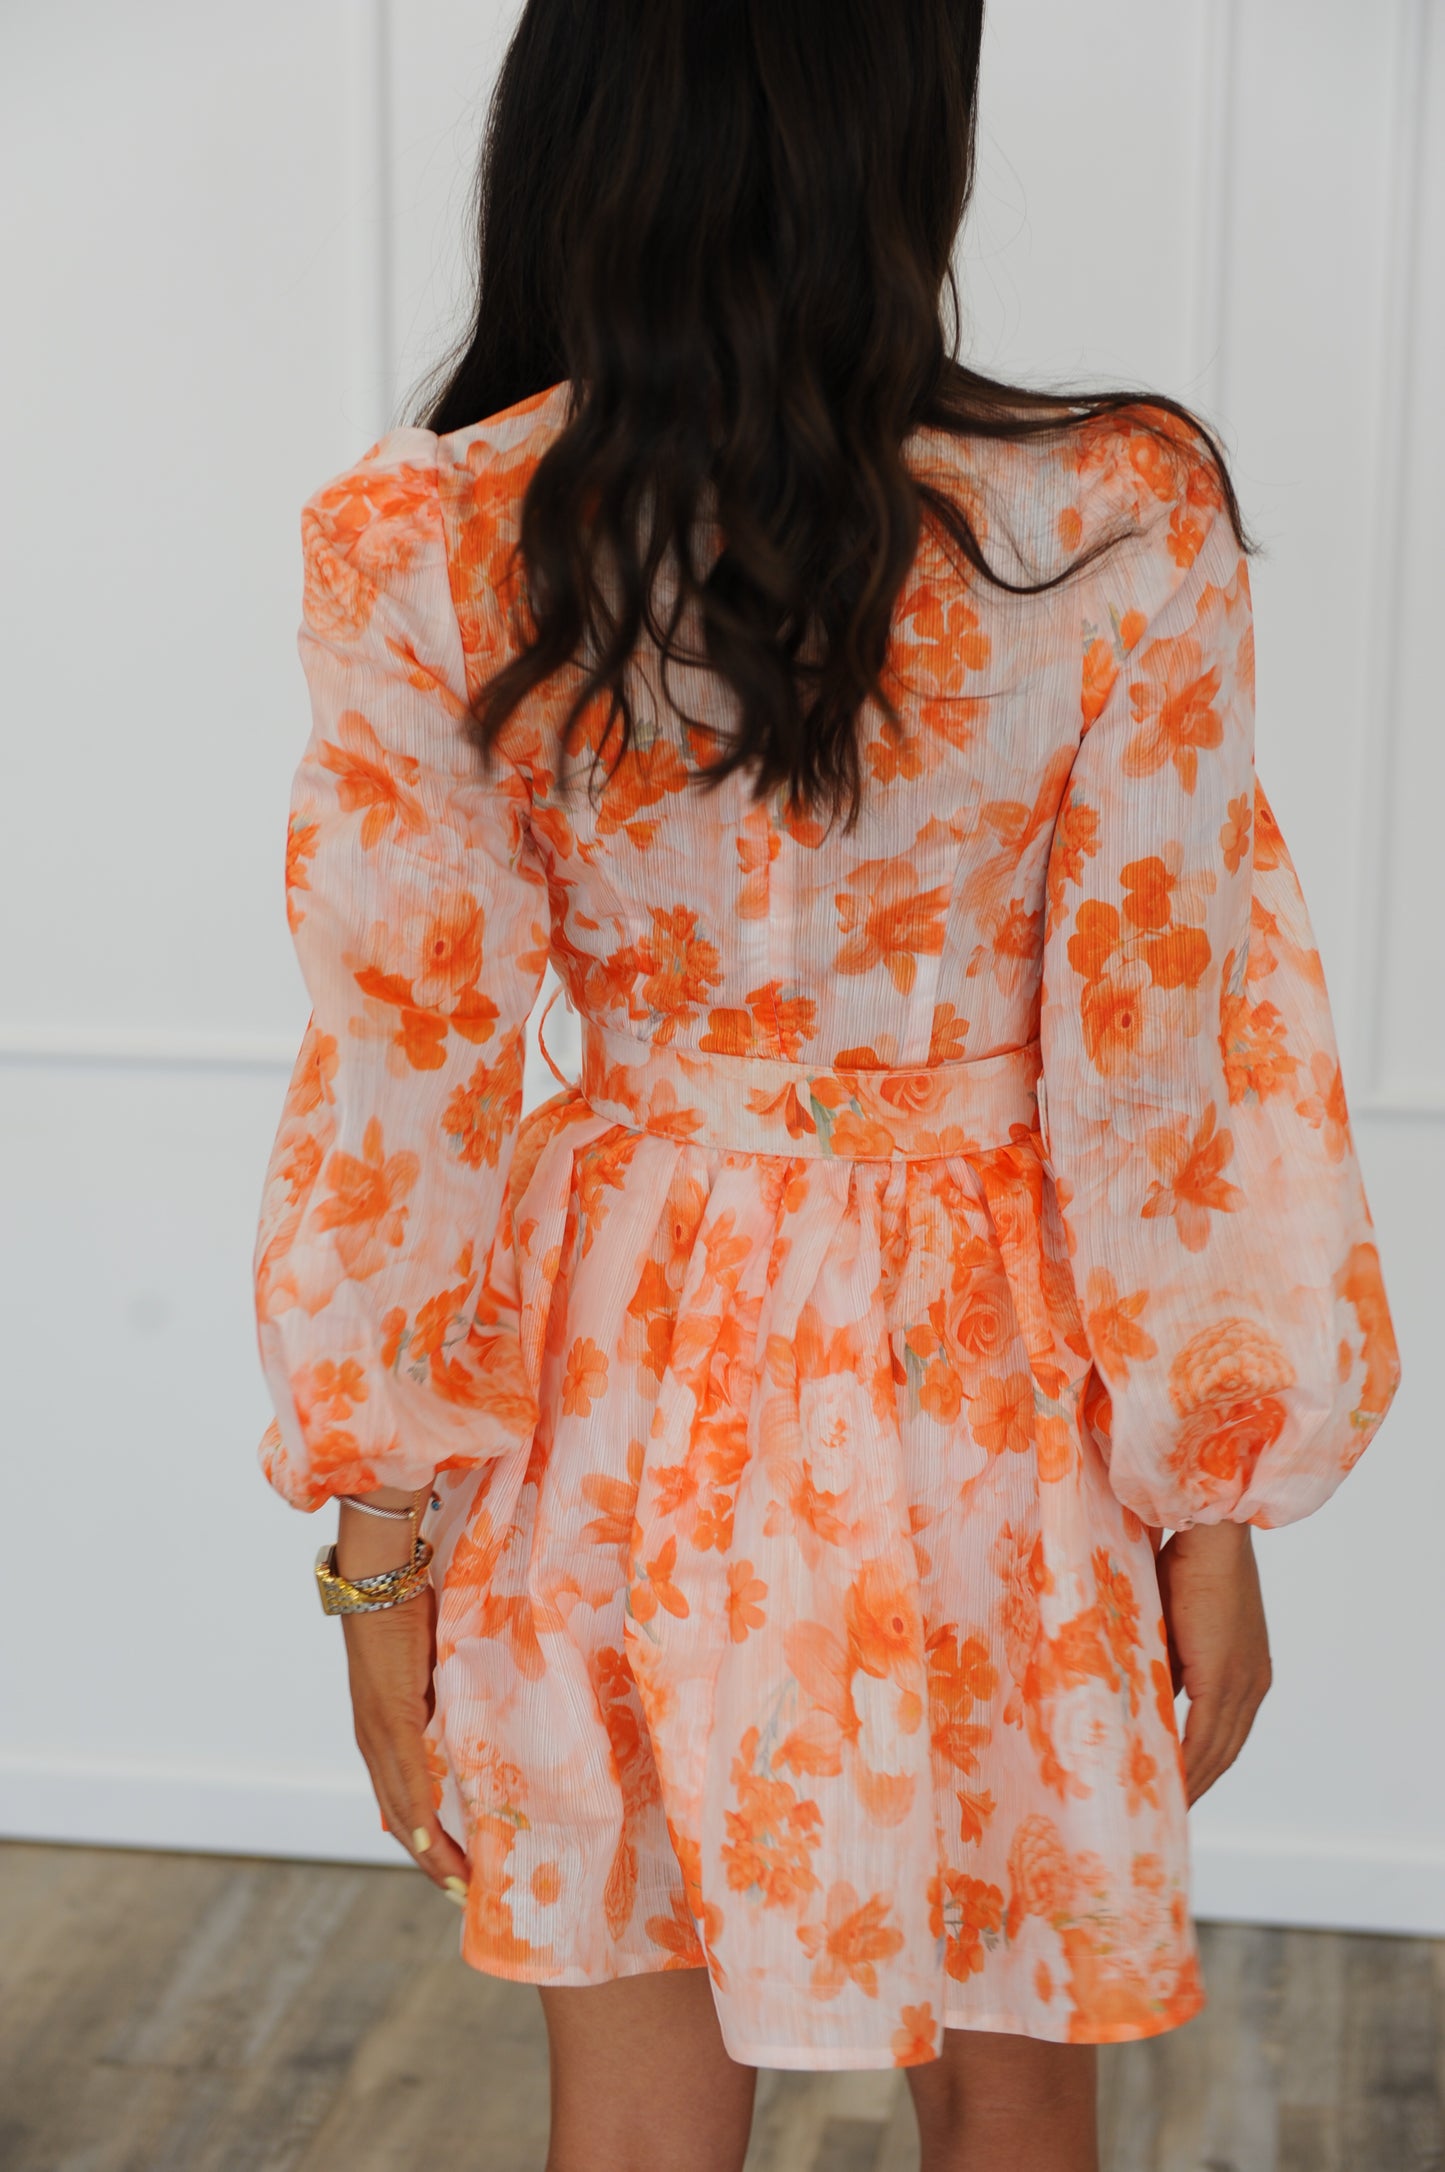 THE CLEMENTINE DRESS